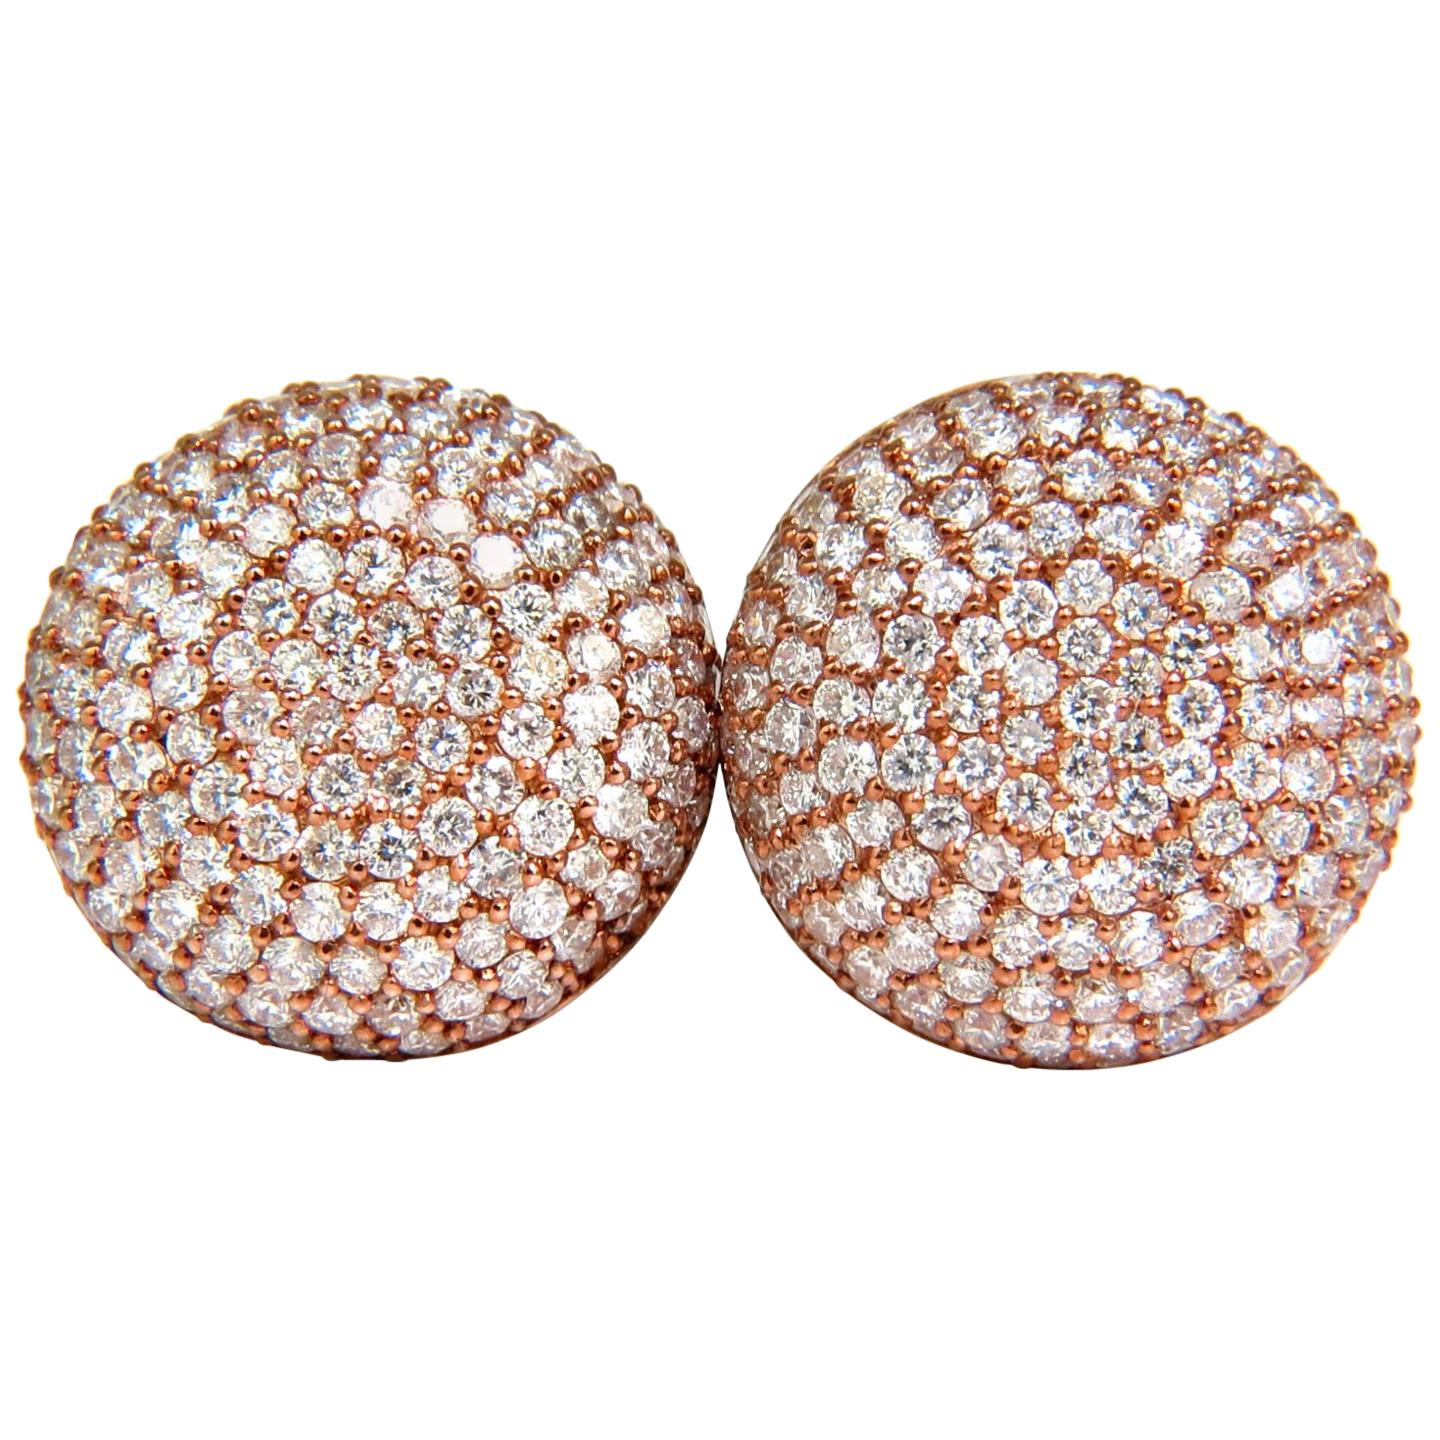 5.50 Carat Diamonds Cluster Domed Bead Set Button Puffed Clip Earrings G/VS For Sale